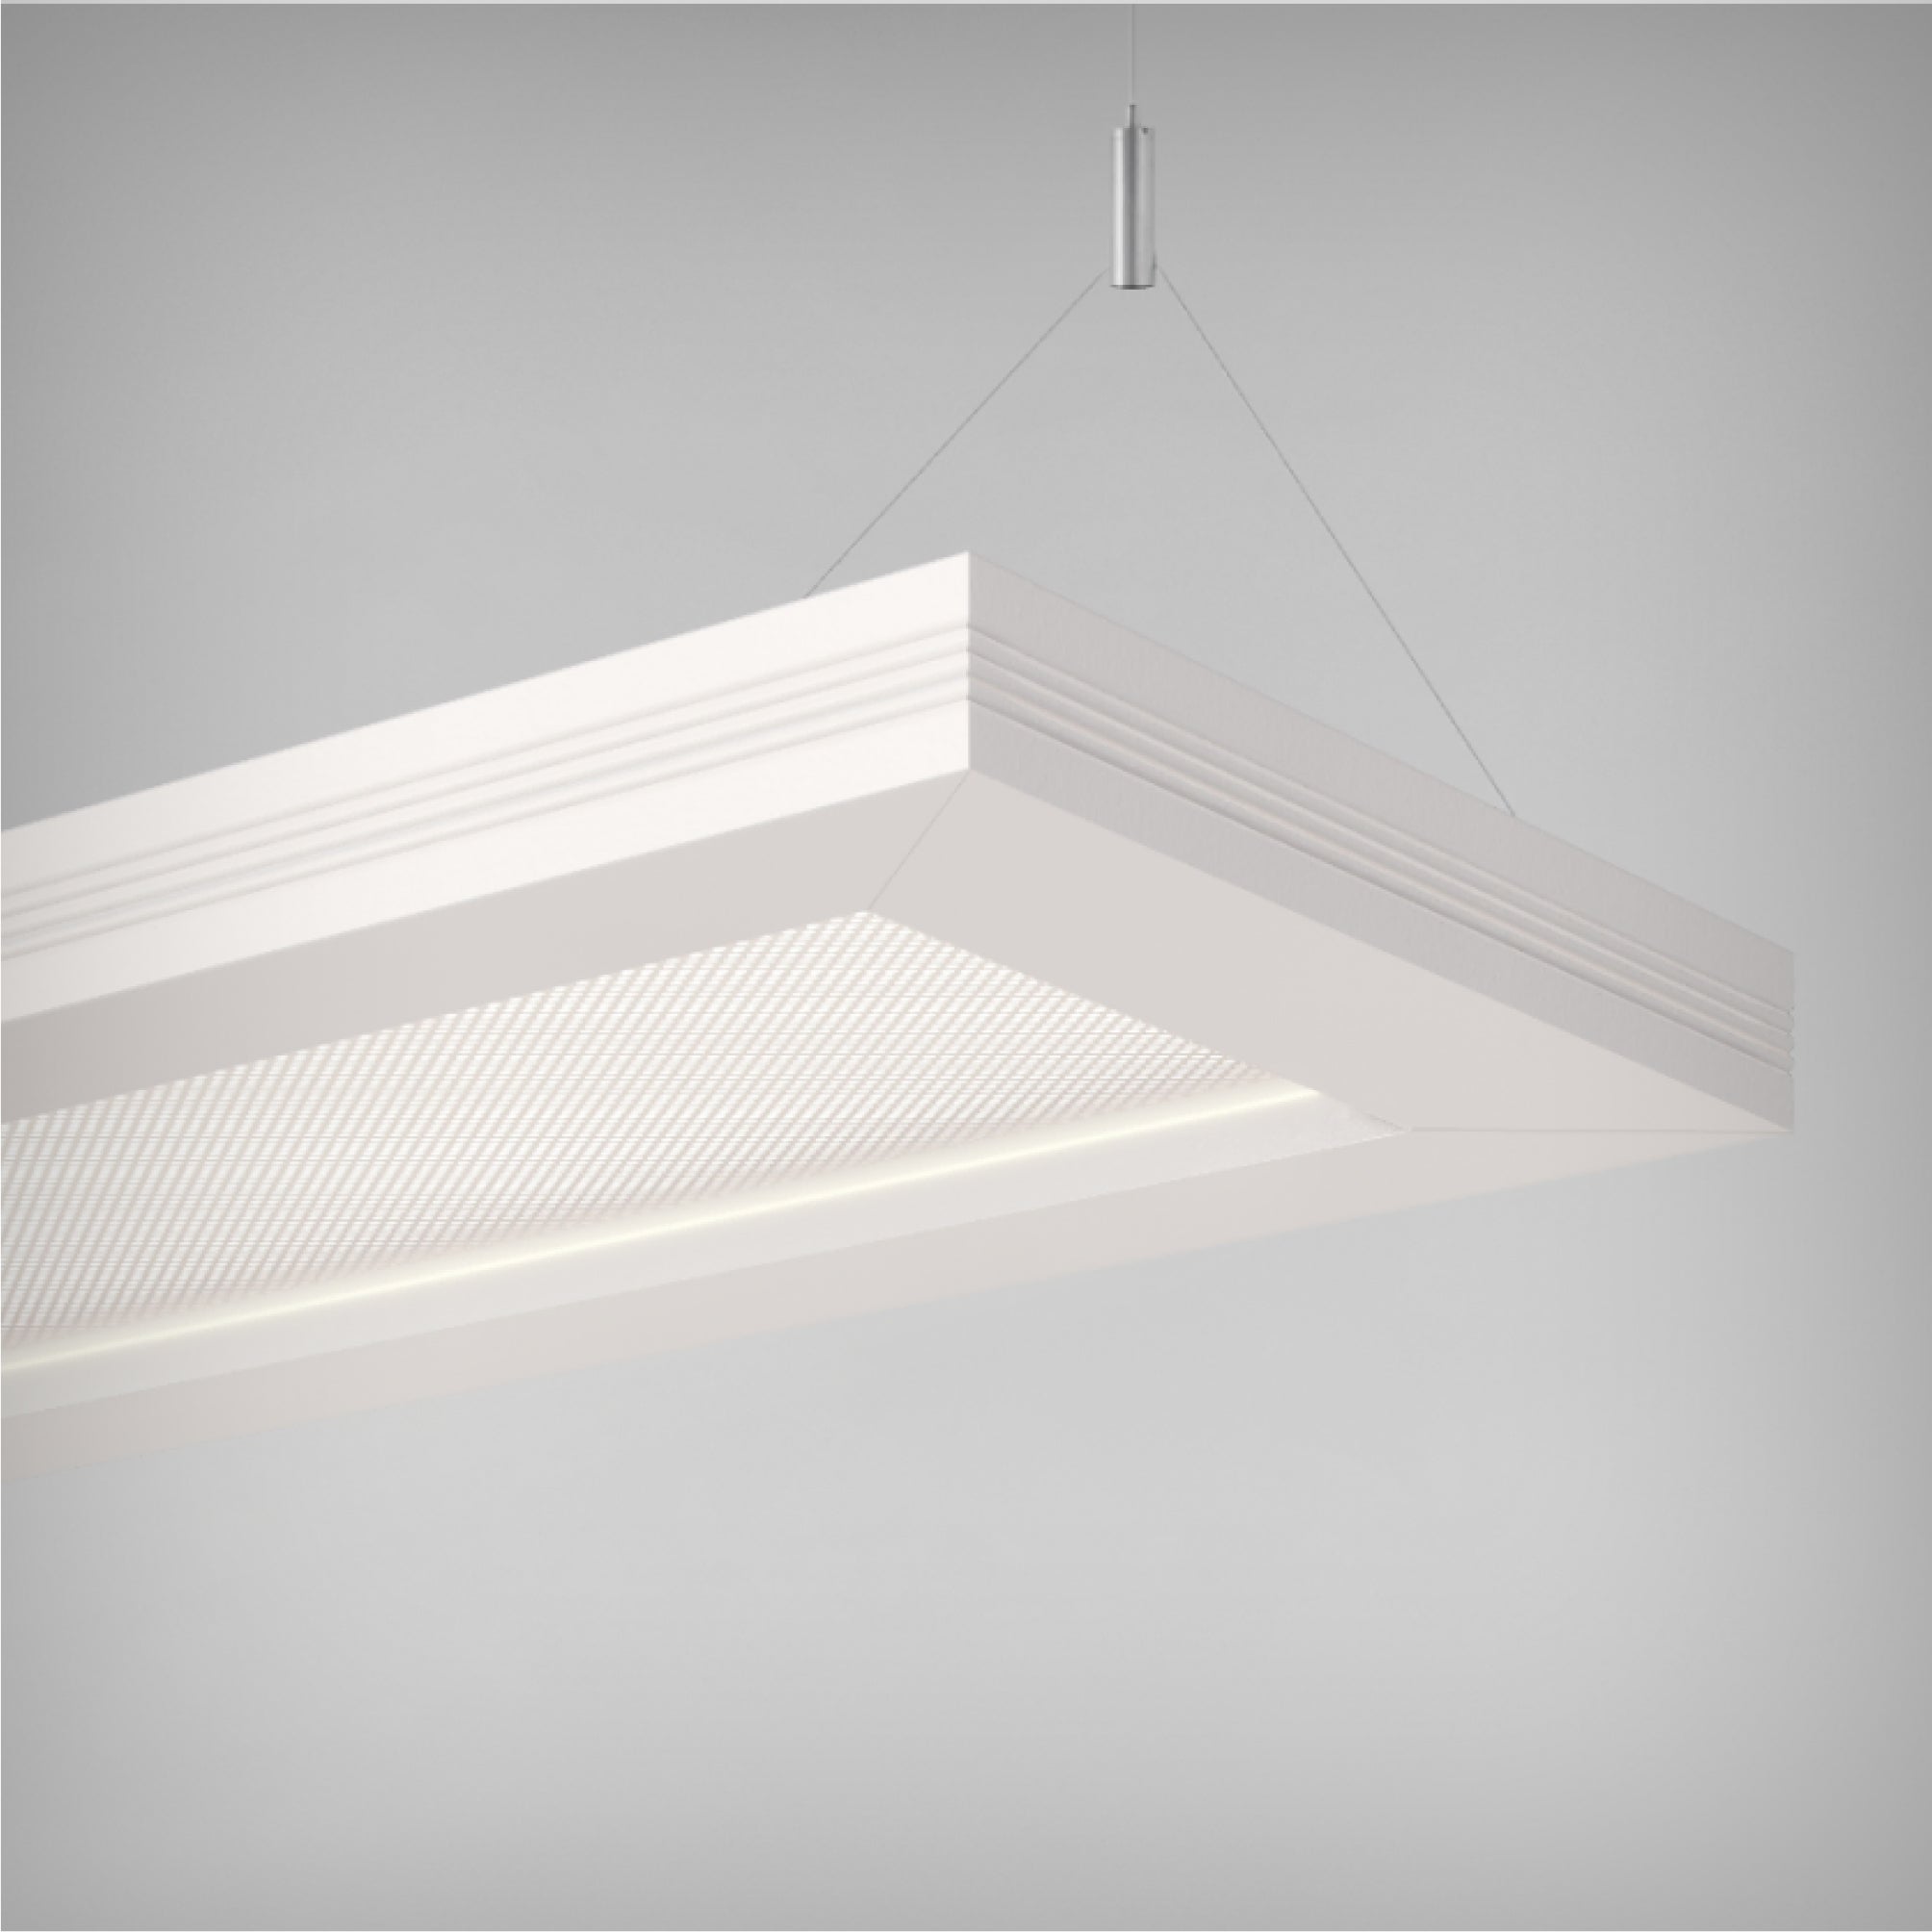 Decorative LED Linear Suspension Light with Lasered-Glass Lens